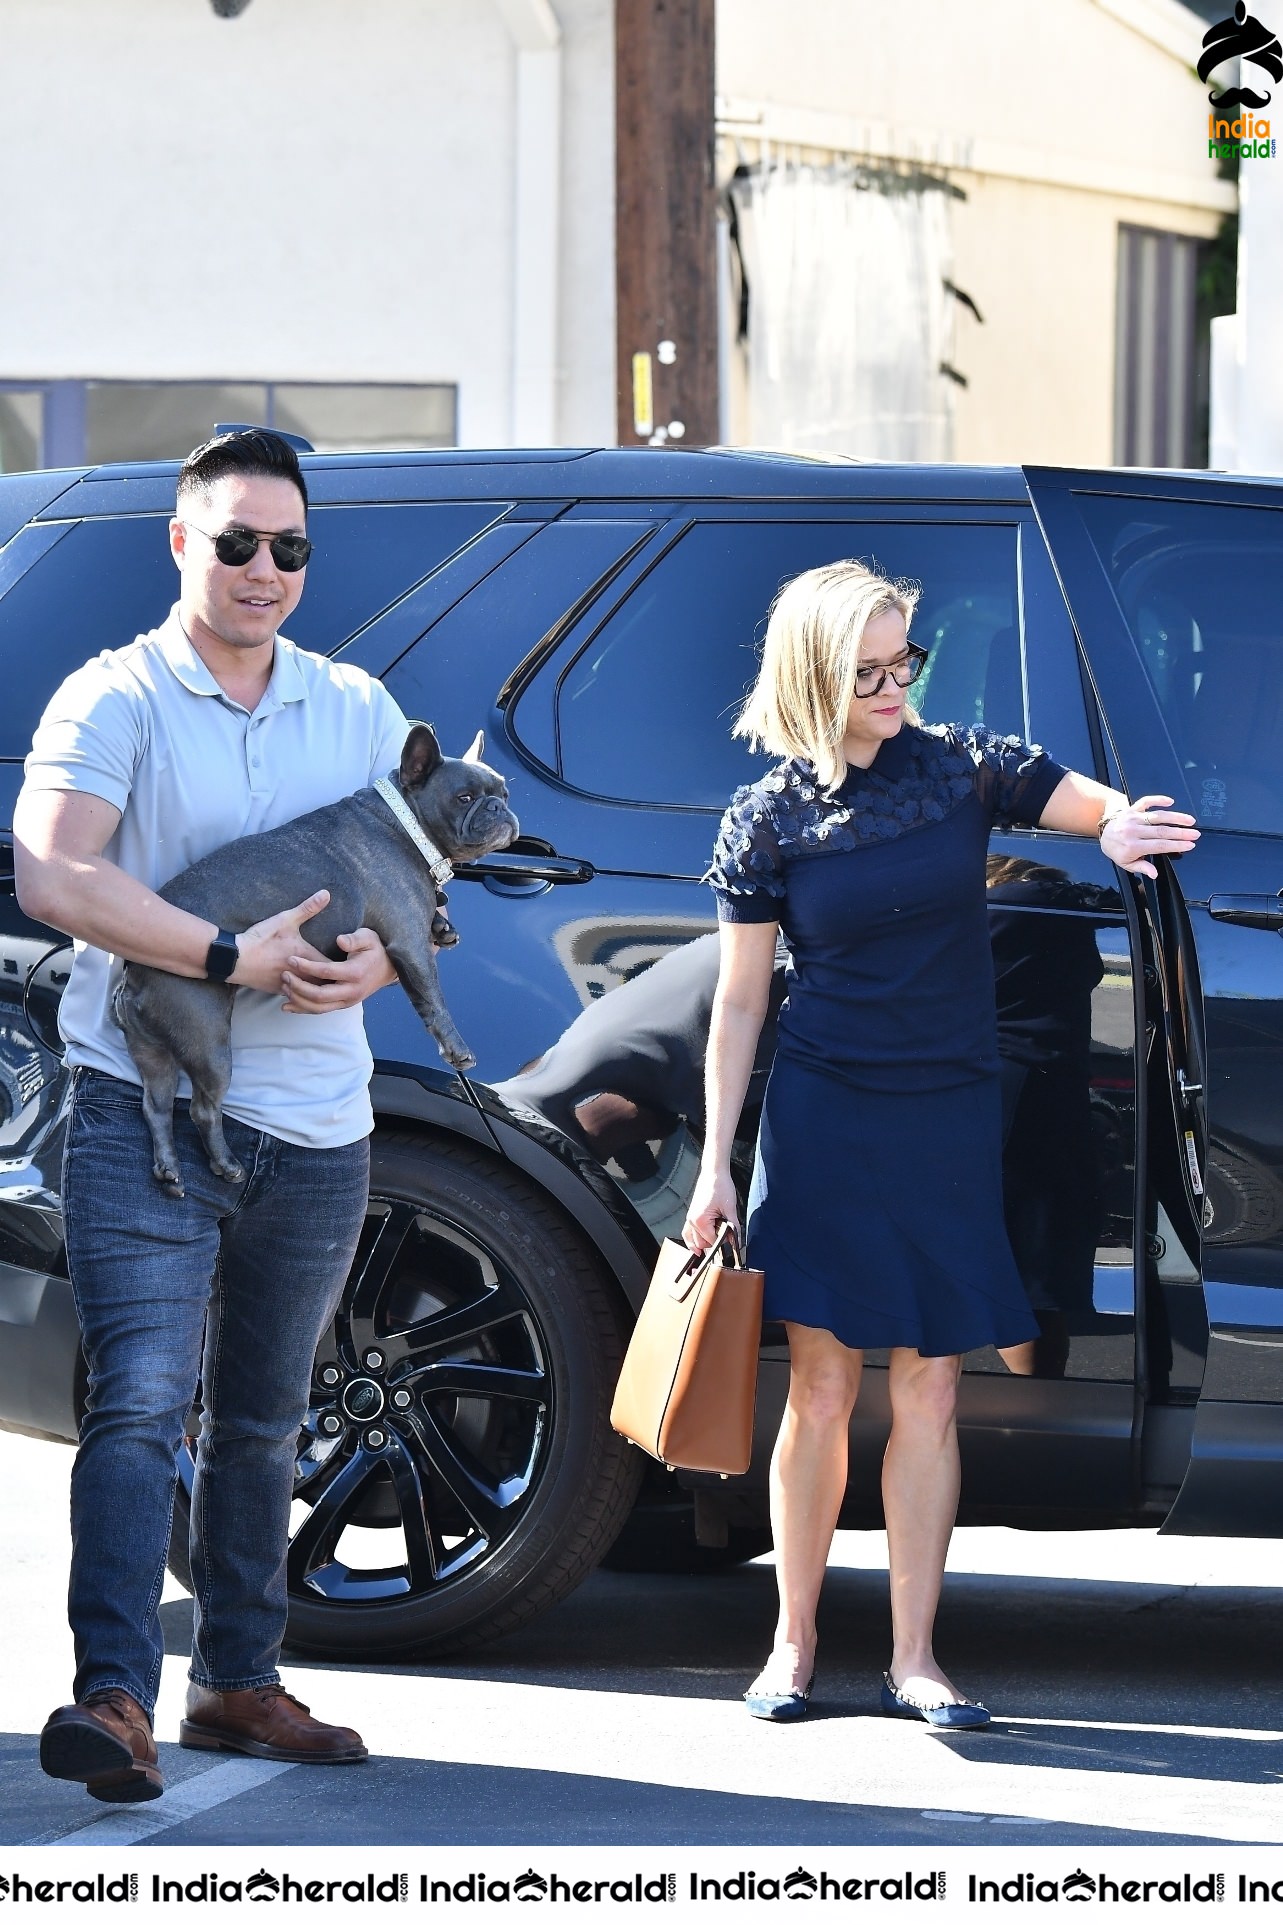 Reese Witherspoon caught by Paparazzi while out in Brentwood CA Set 1